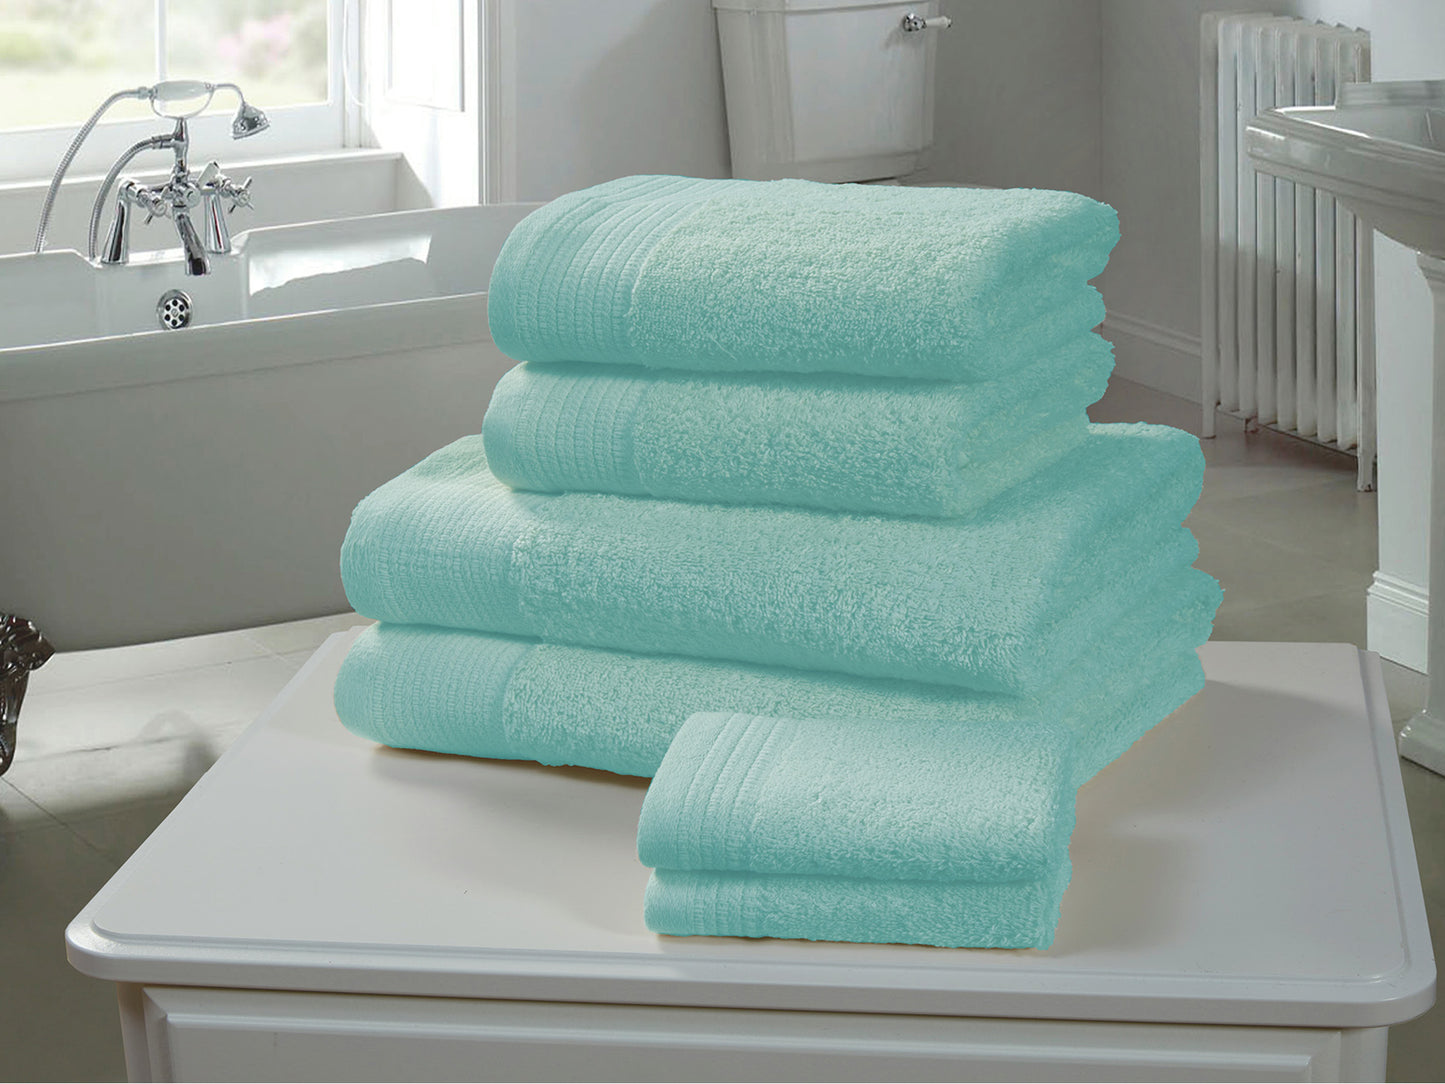 Chatsworth 100% Egyptian Cotton Bathroom Towels 600gsm Turquoise